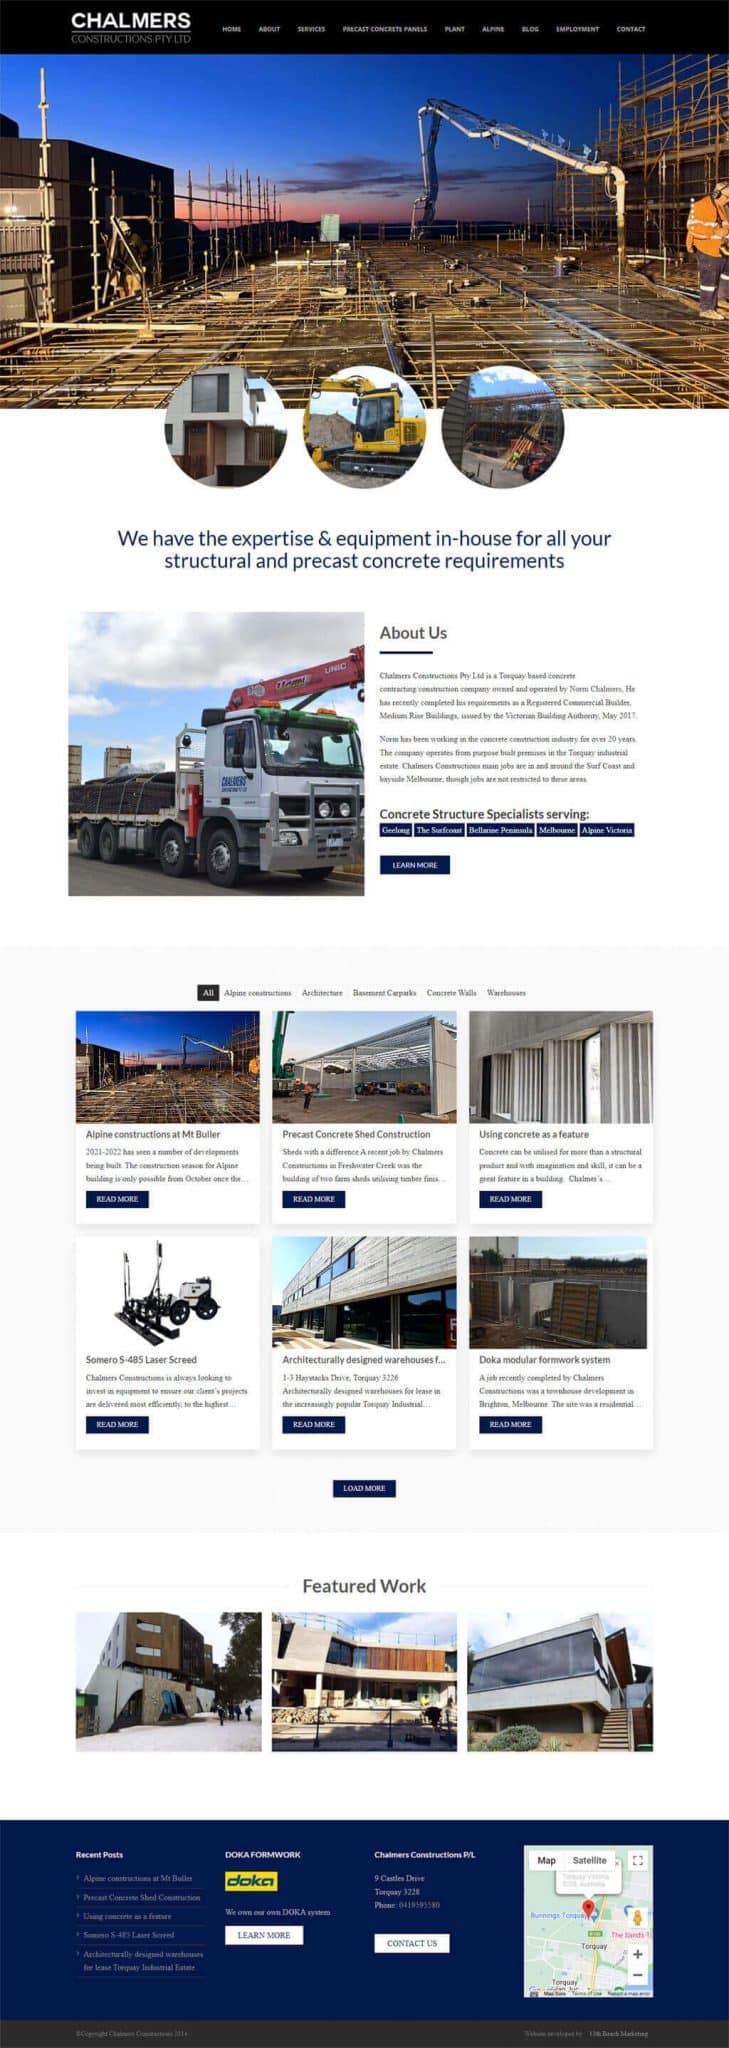 Website designed for a specialist construction company based in Torquay, includes SEO and copywriting